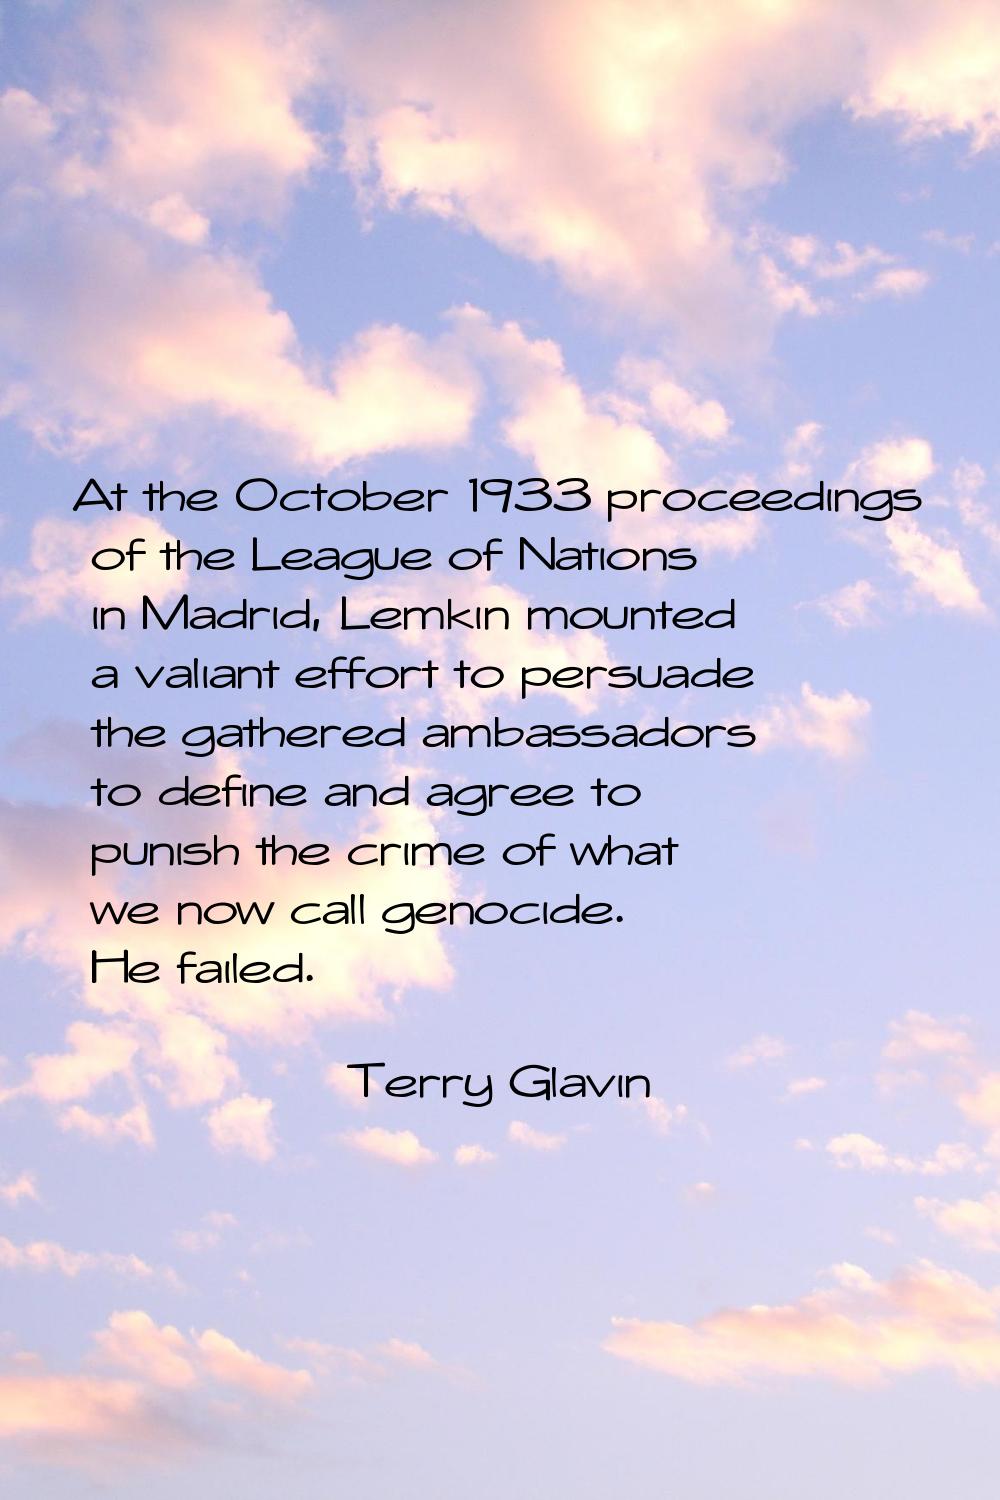 At the October 1933 proceedings of the League of Nations in Madrid, Lemkin mounted a valiant effort